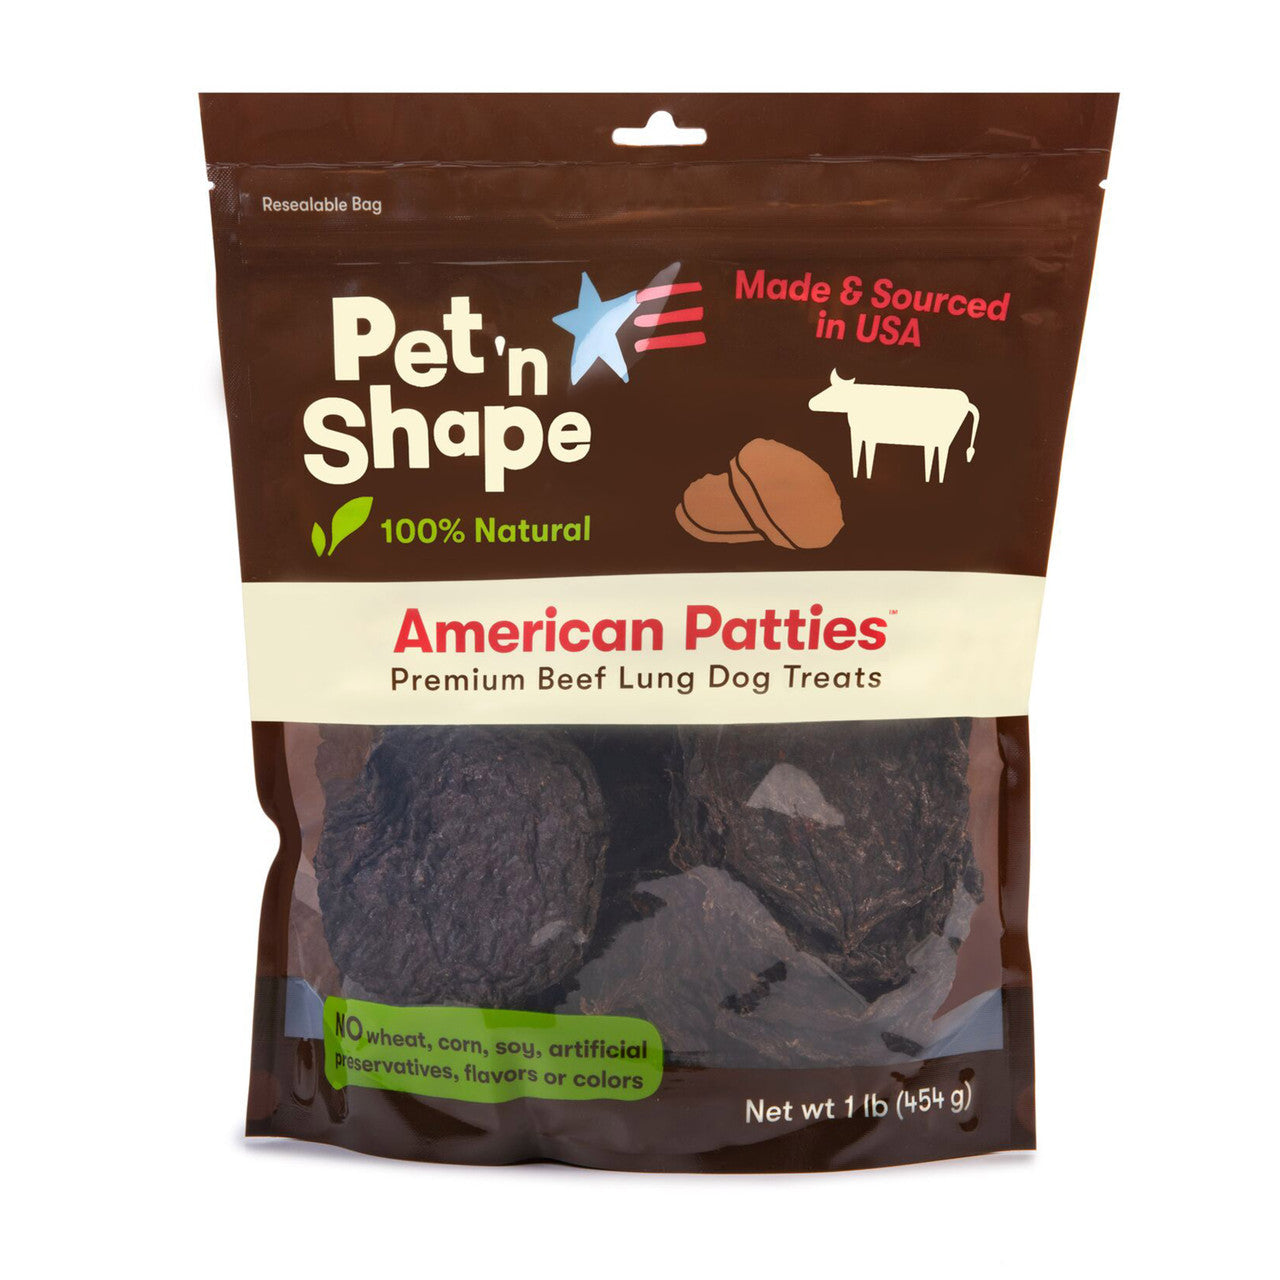 Pet 'N Shape American Patties Dog Treat Made and Sourced in the USA 1 lb (D)